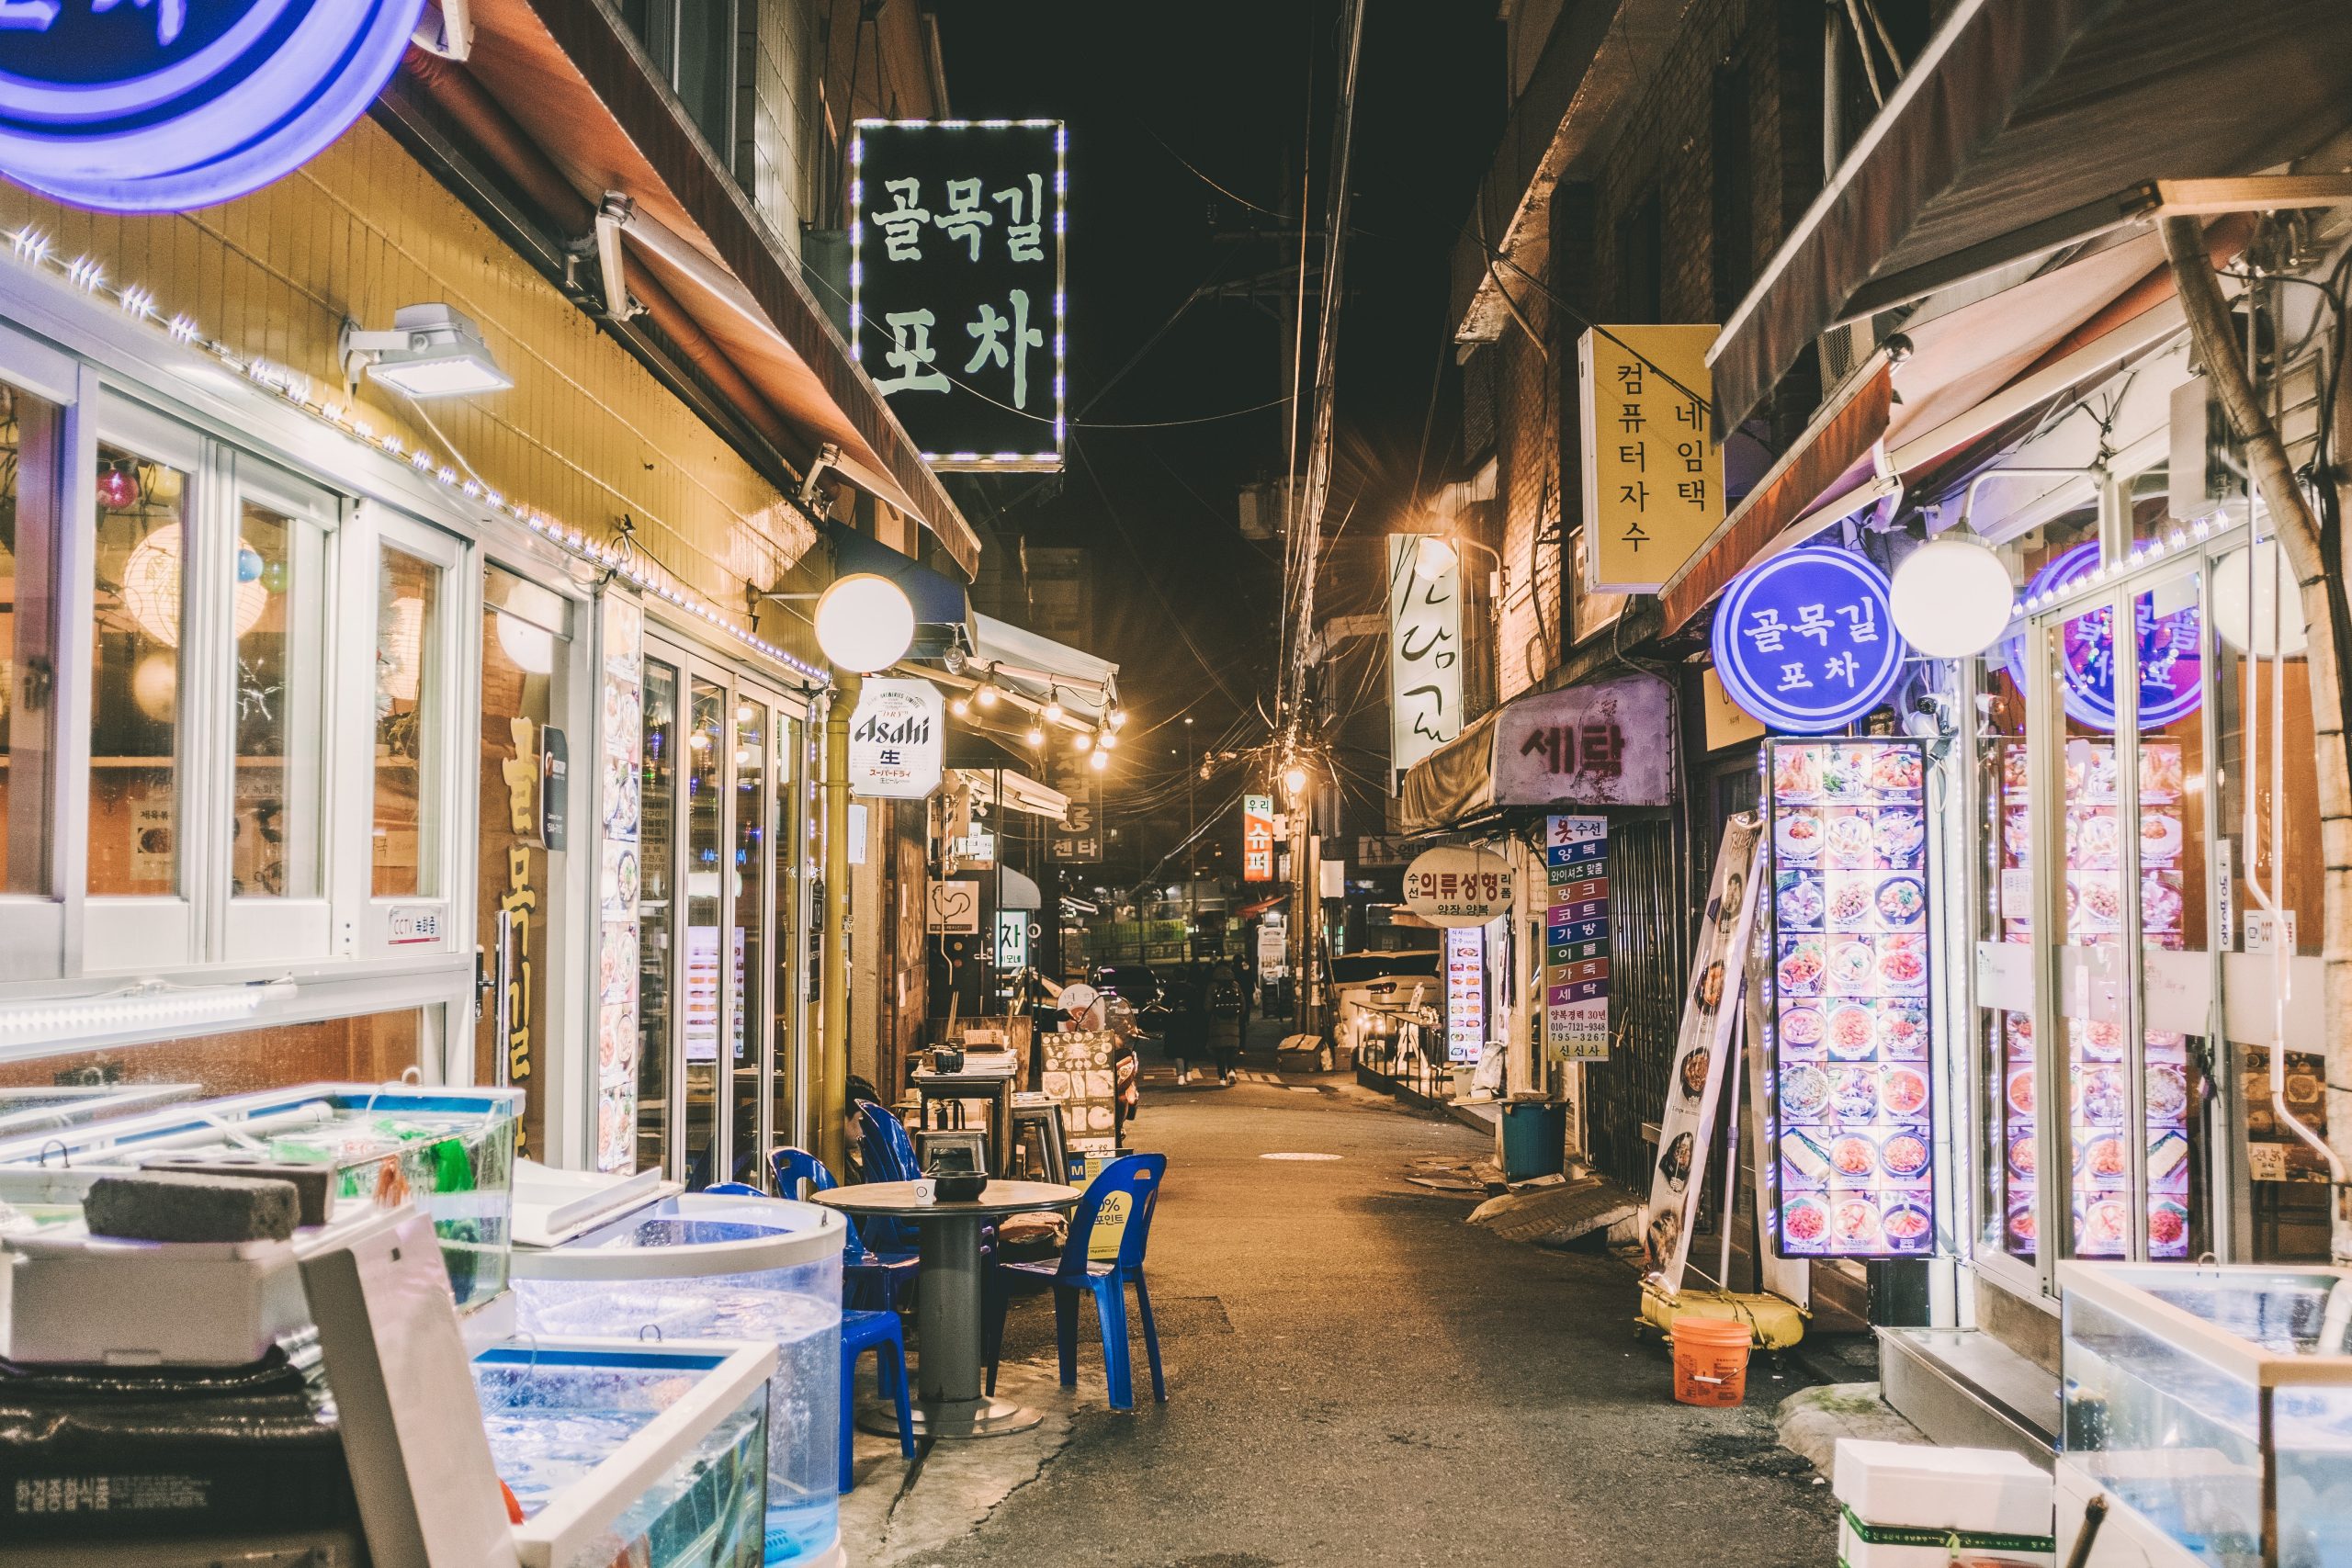 Itaewon with its street food and restaurants in the evening - a great place to stay in Seoul